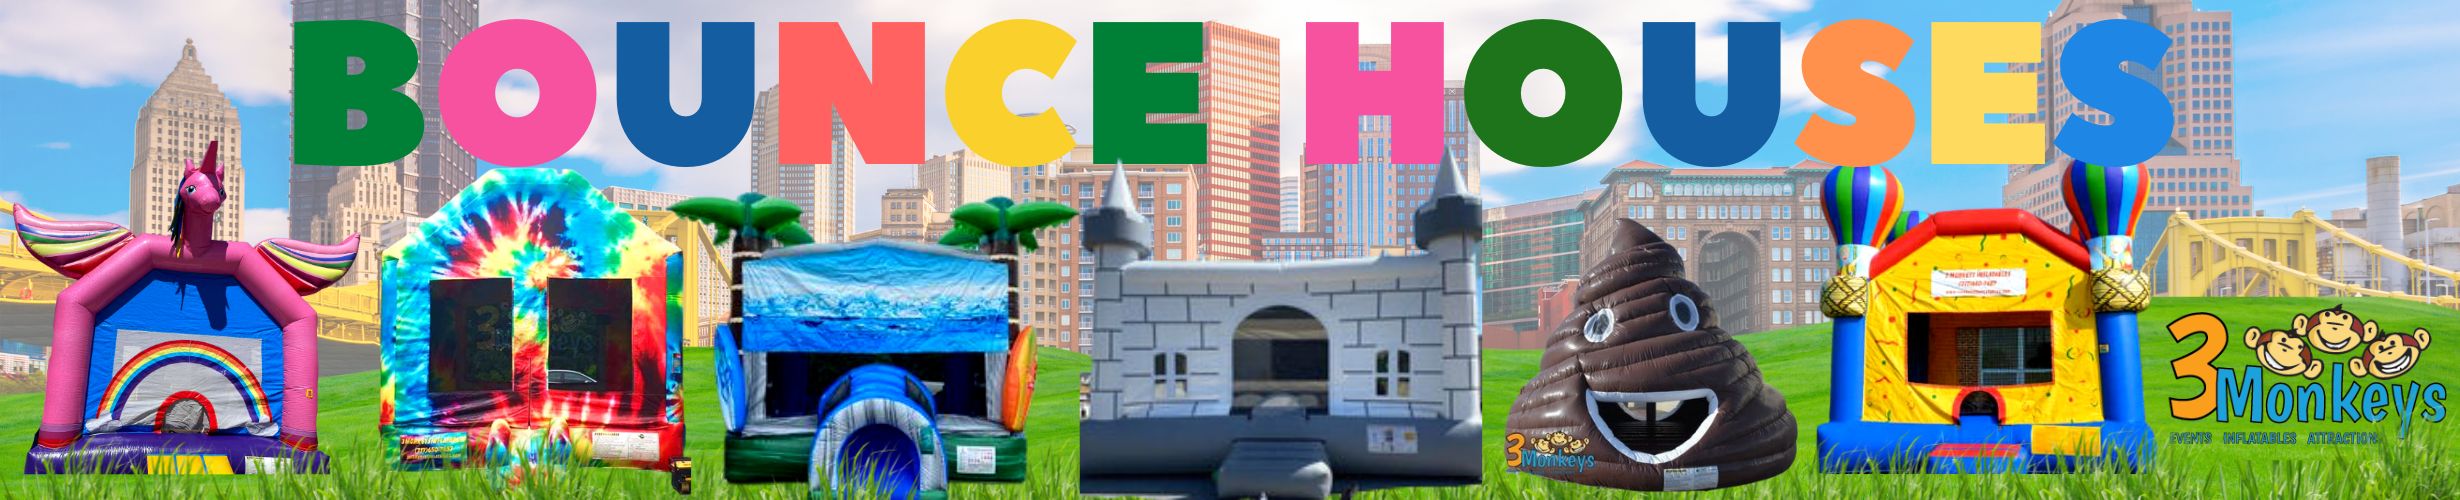 Bounce House Rentals |Central PA 